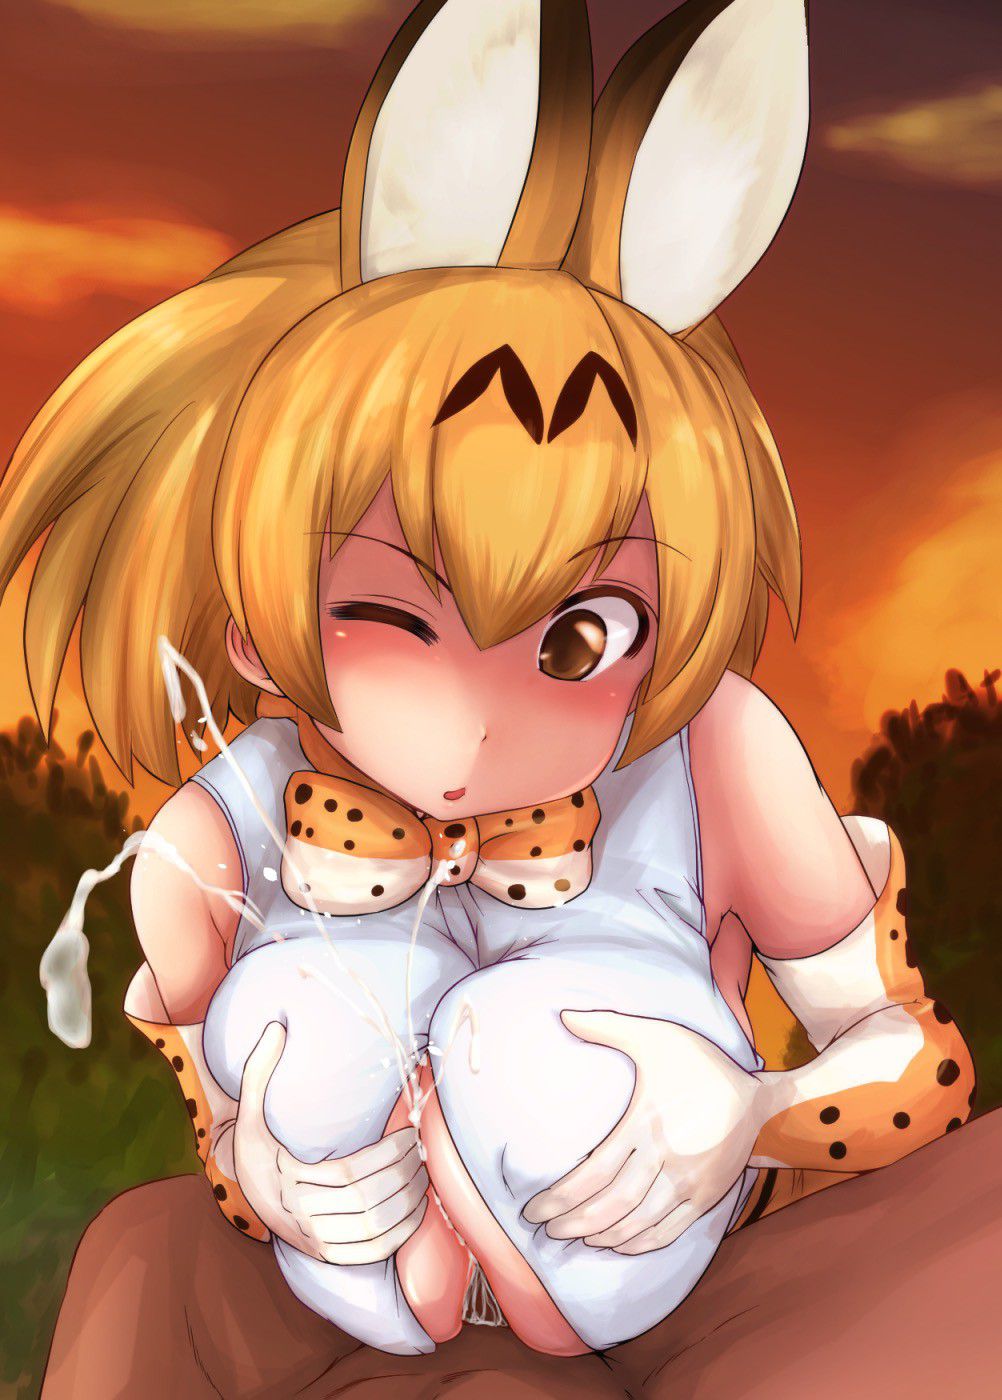 Erotic image that comes through the serval of Ahe face that is about to fall into pleasure! 【Kim no Friends】 9